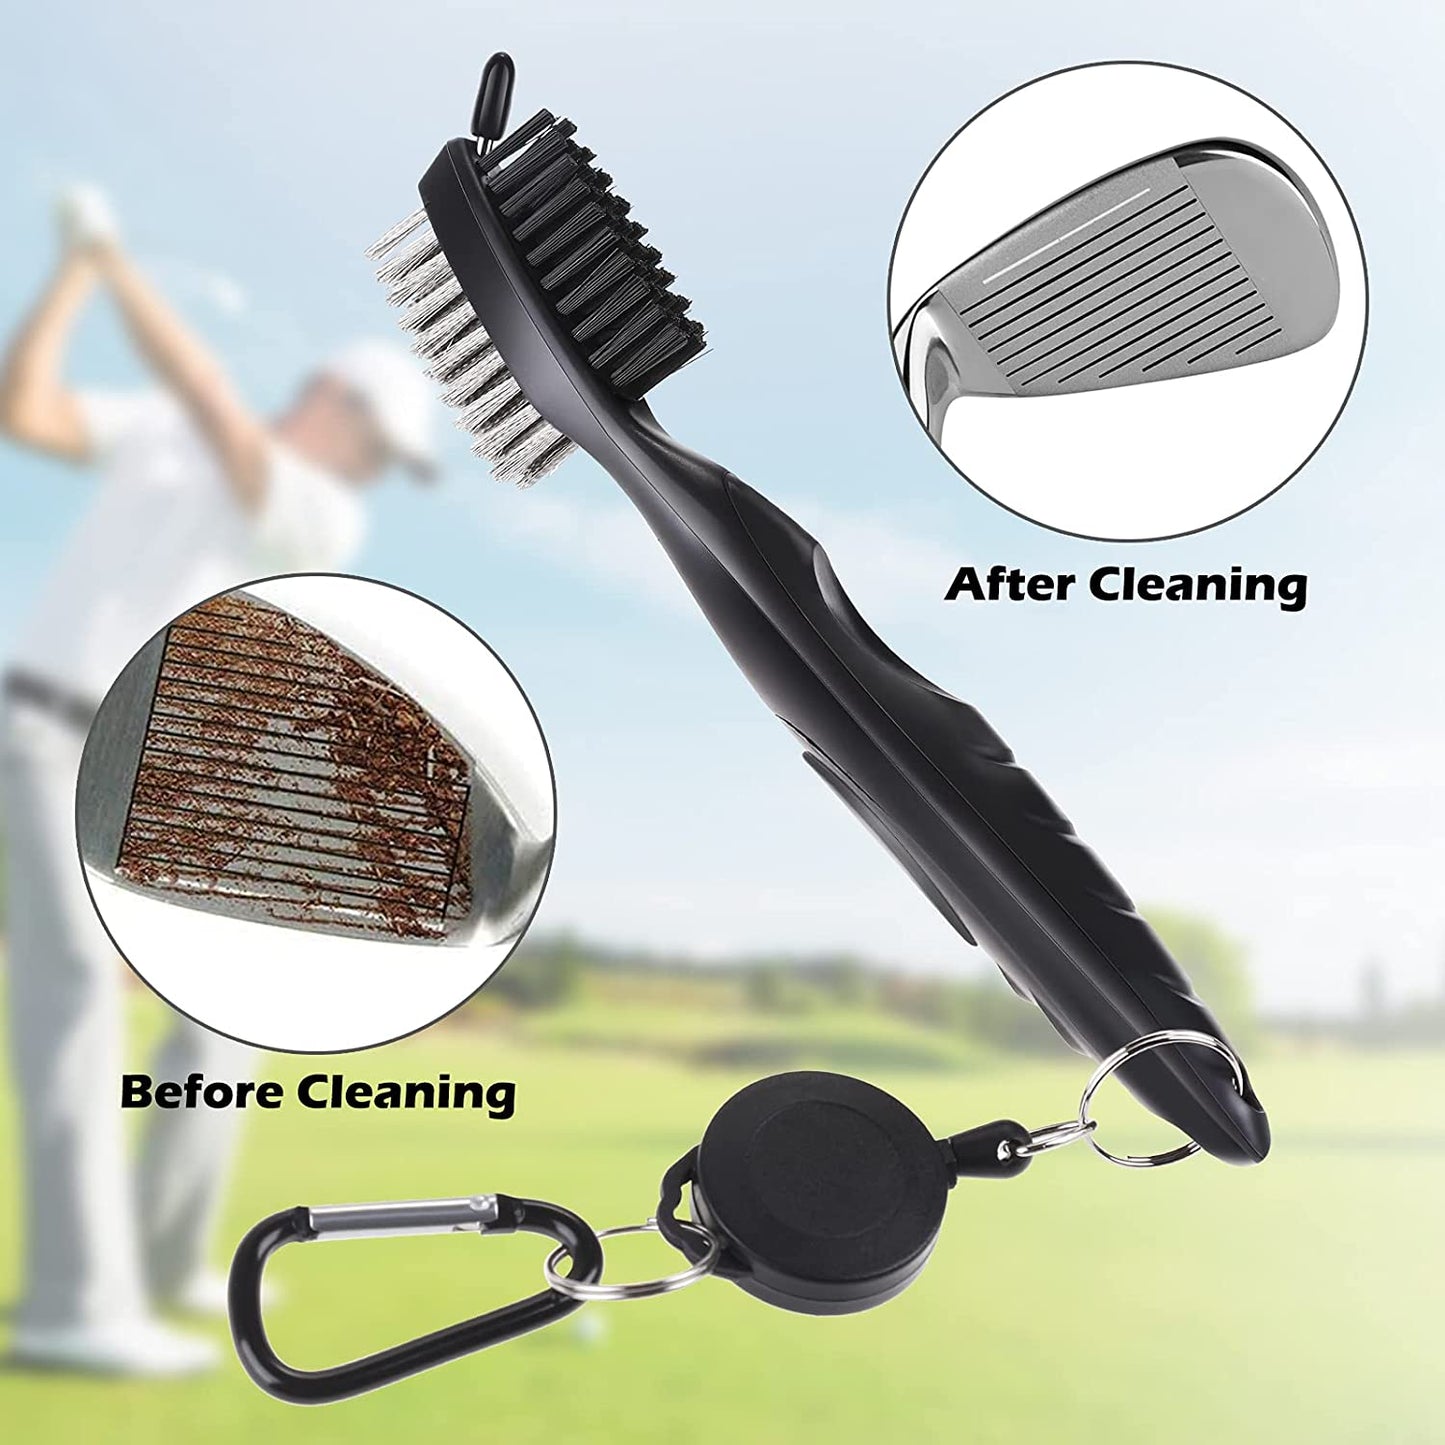 13 in 1 Golf Accessories - Golf Towel and Golf Club Brush, Golf Cleaning Tool Kit, Golf Ball Cleaner Pouch, Black …